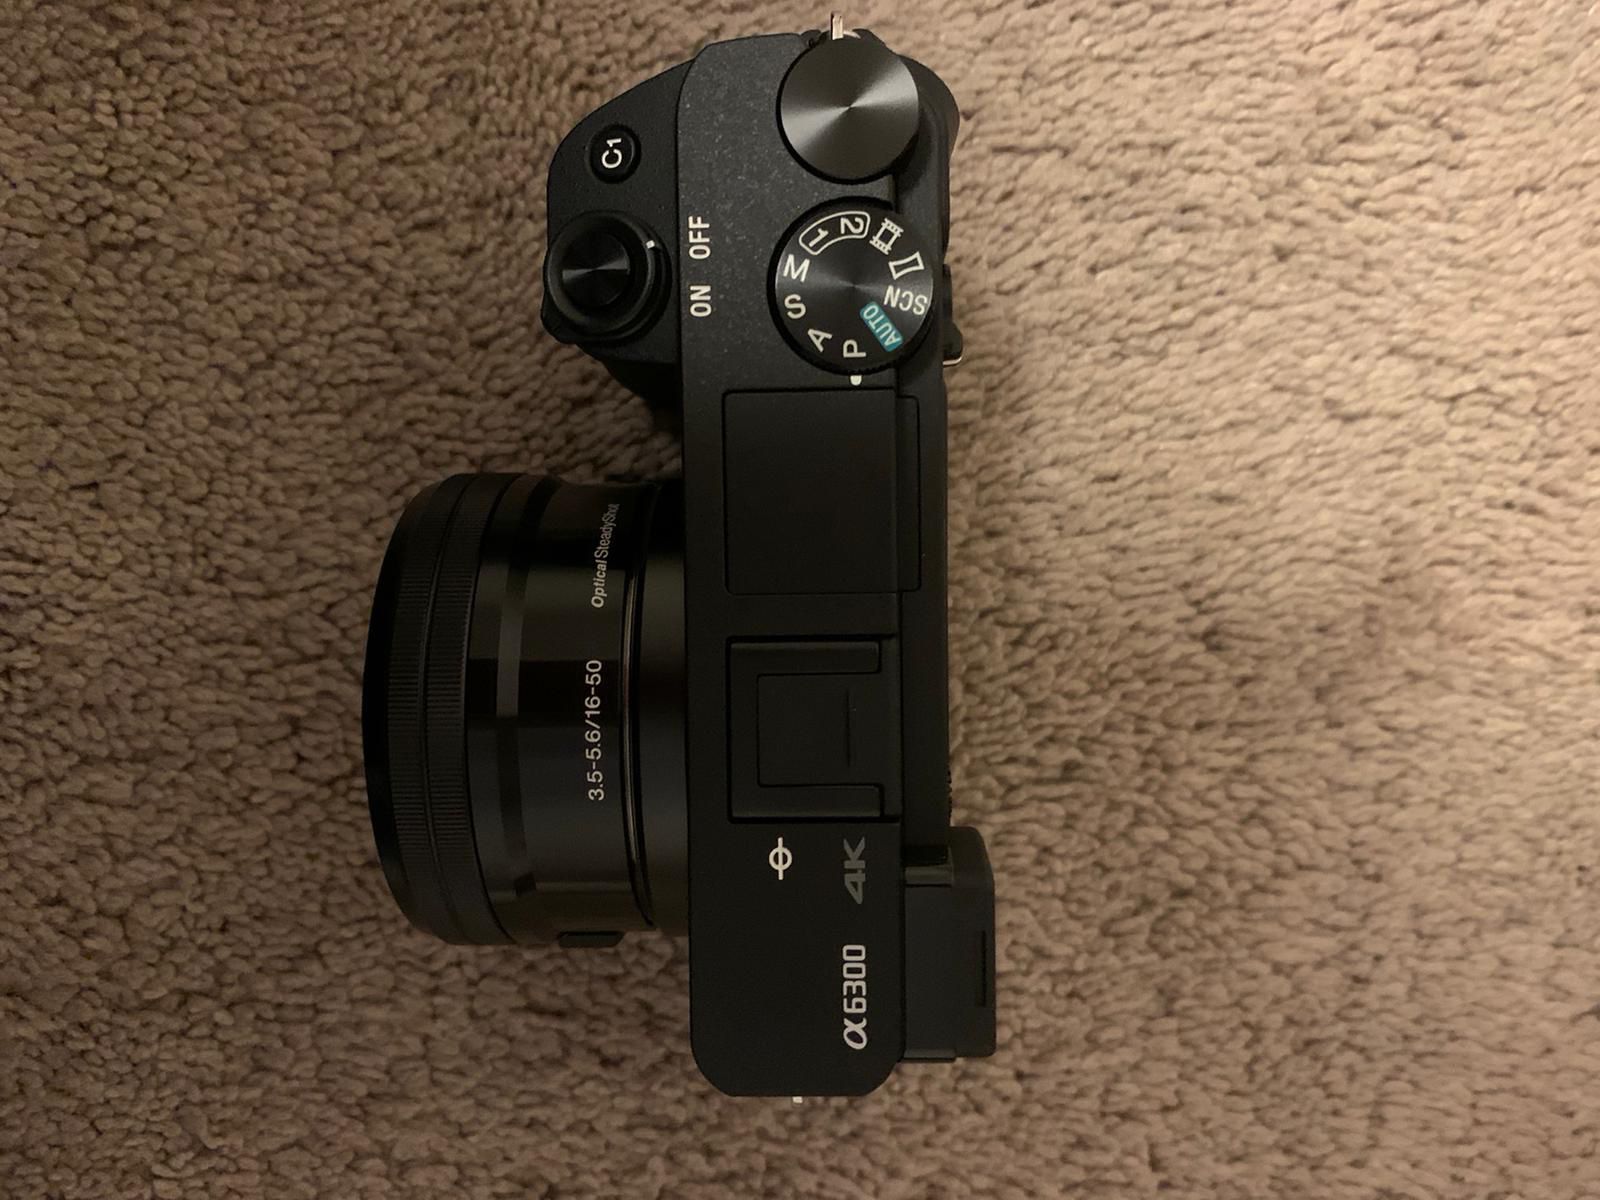 New-Never Used-Sony A6300 4K Body and 16-50 OSS Lens